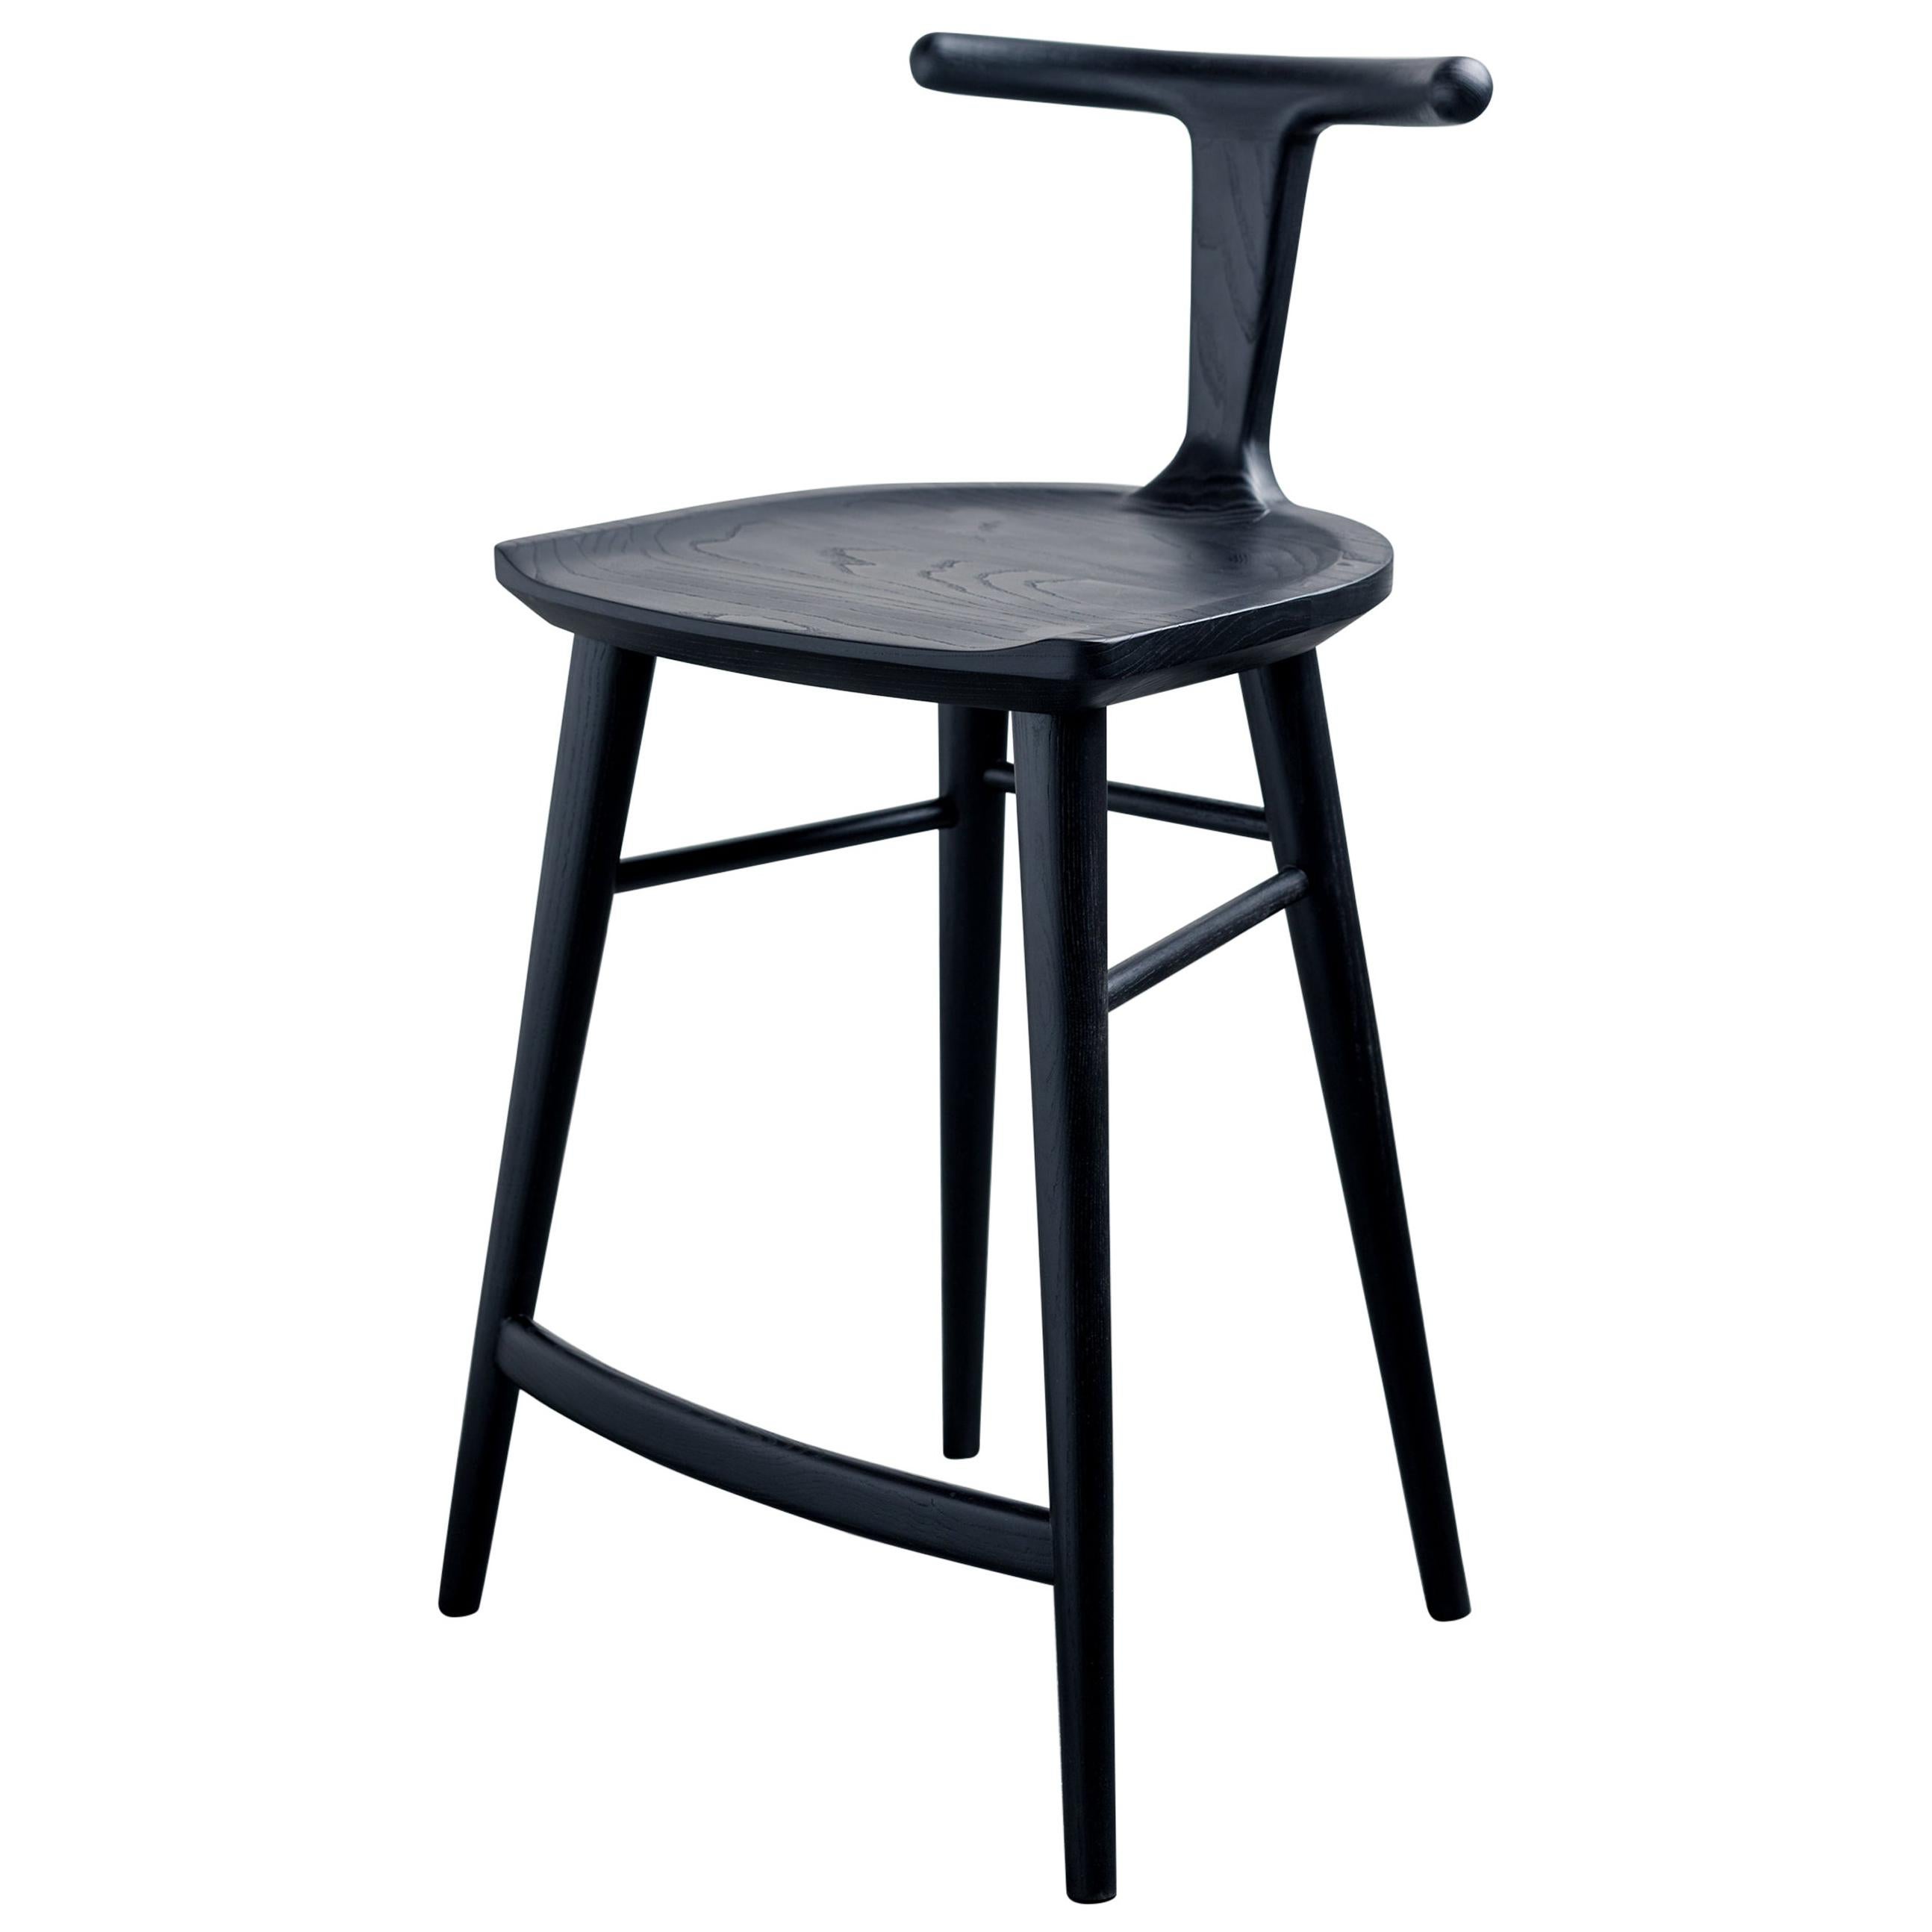 Oxbend Stool, Bar or Counter Seat in Black Charcoal Ashwood